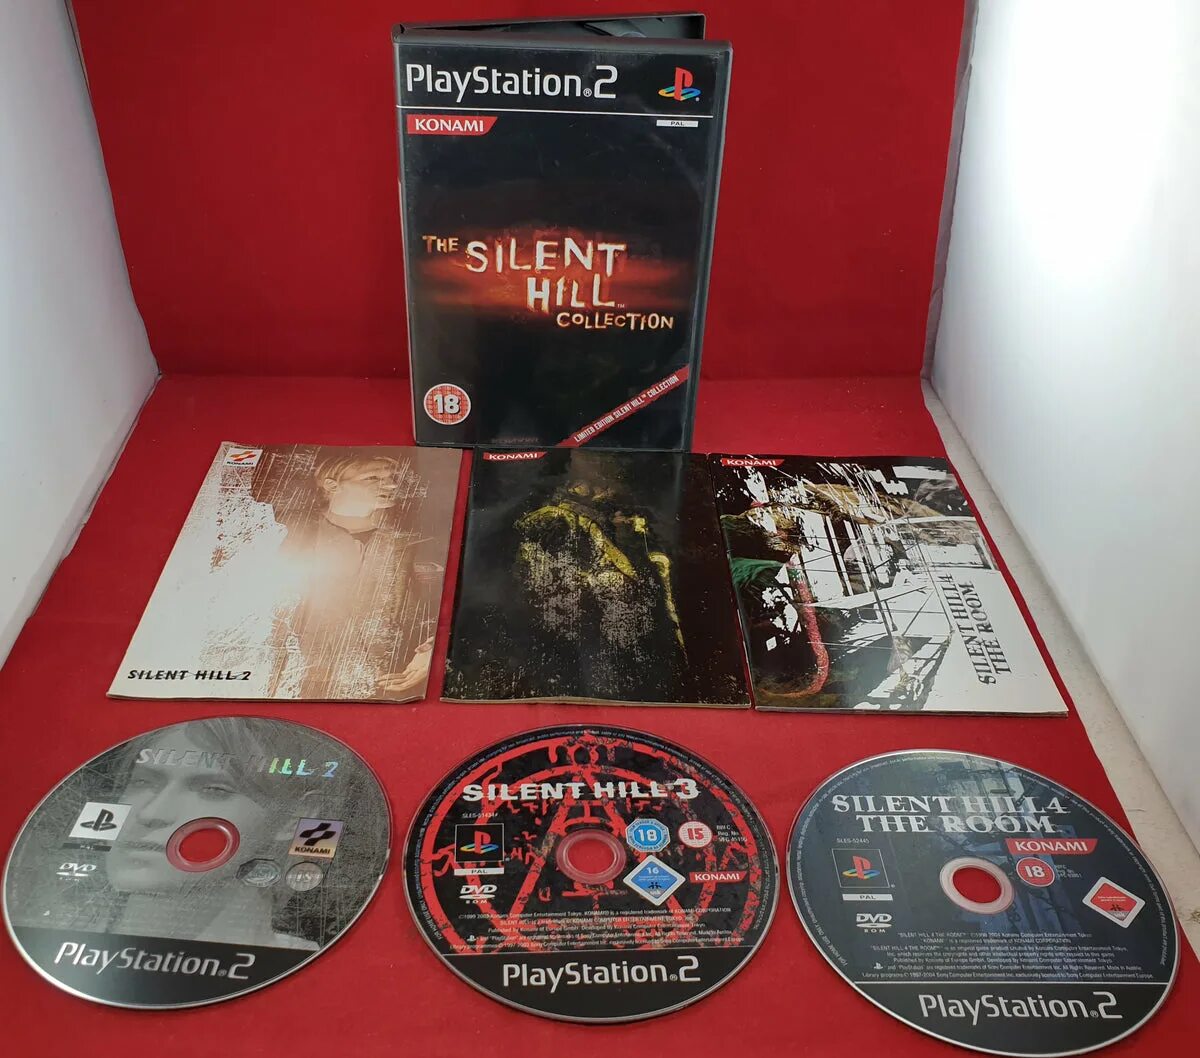 Silent Hill ps2 диск. PLAYSTATION 2 Disk Silent Hill. Collection ps2